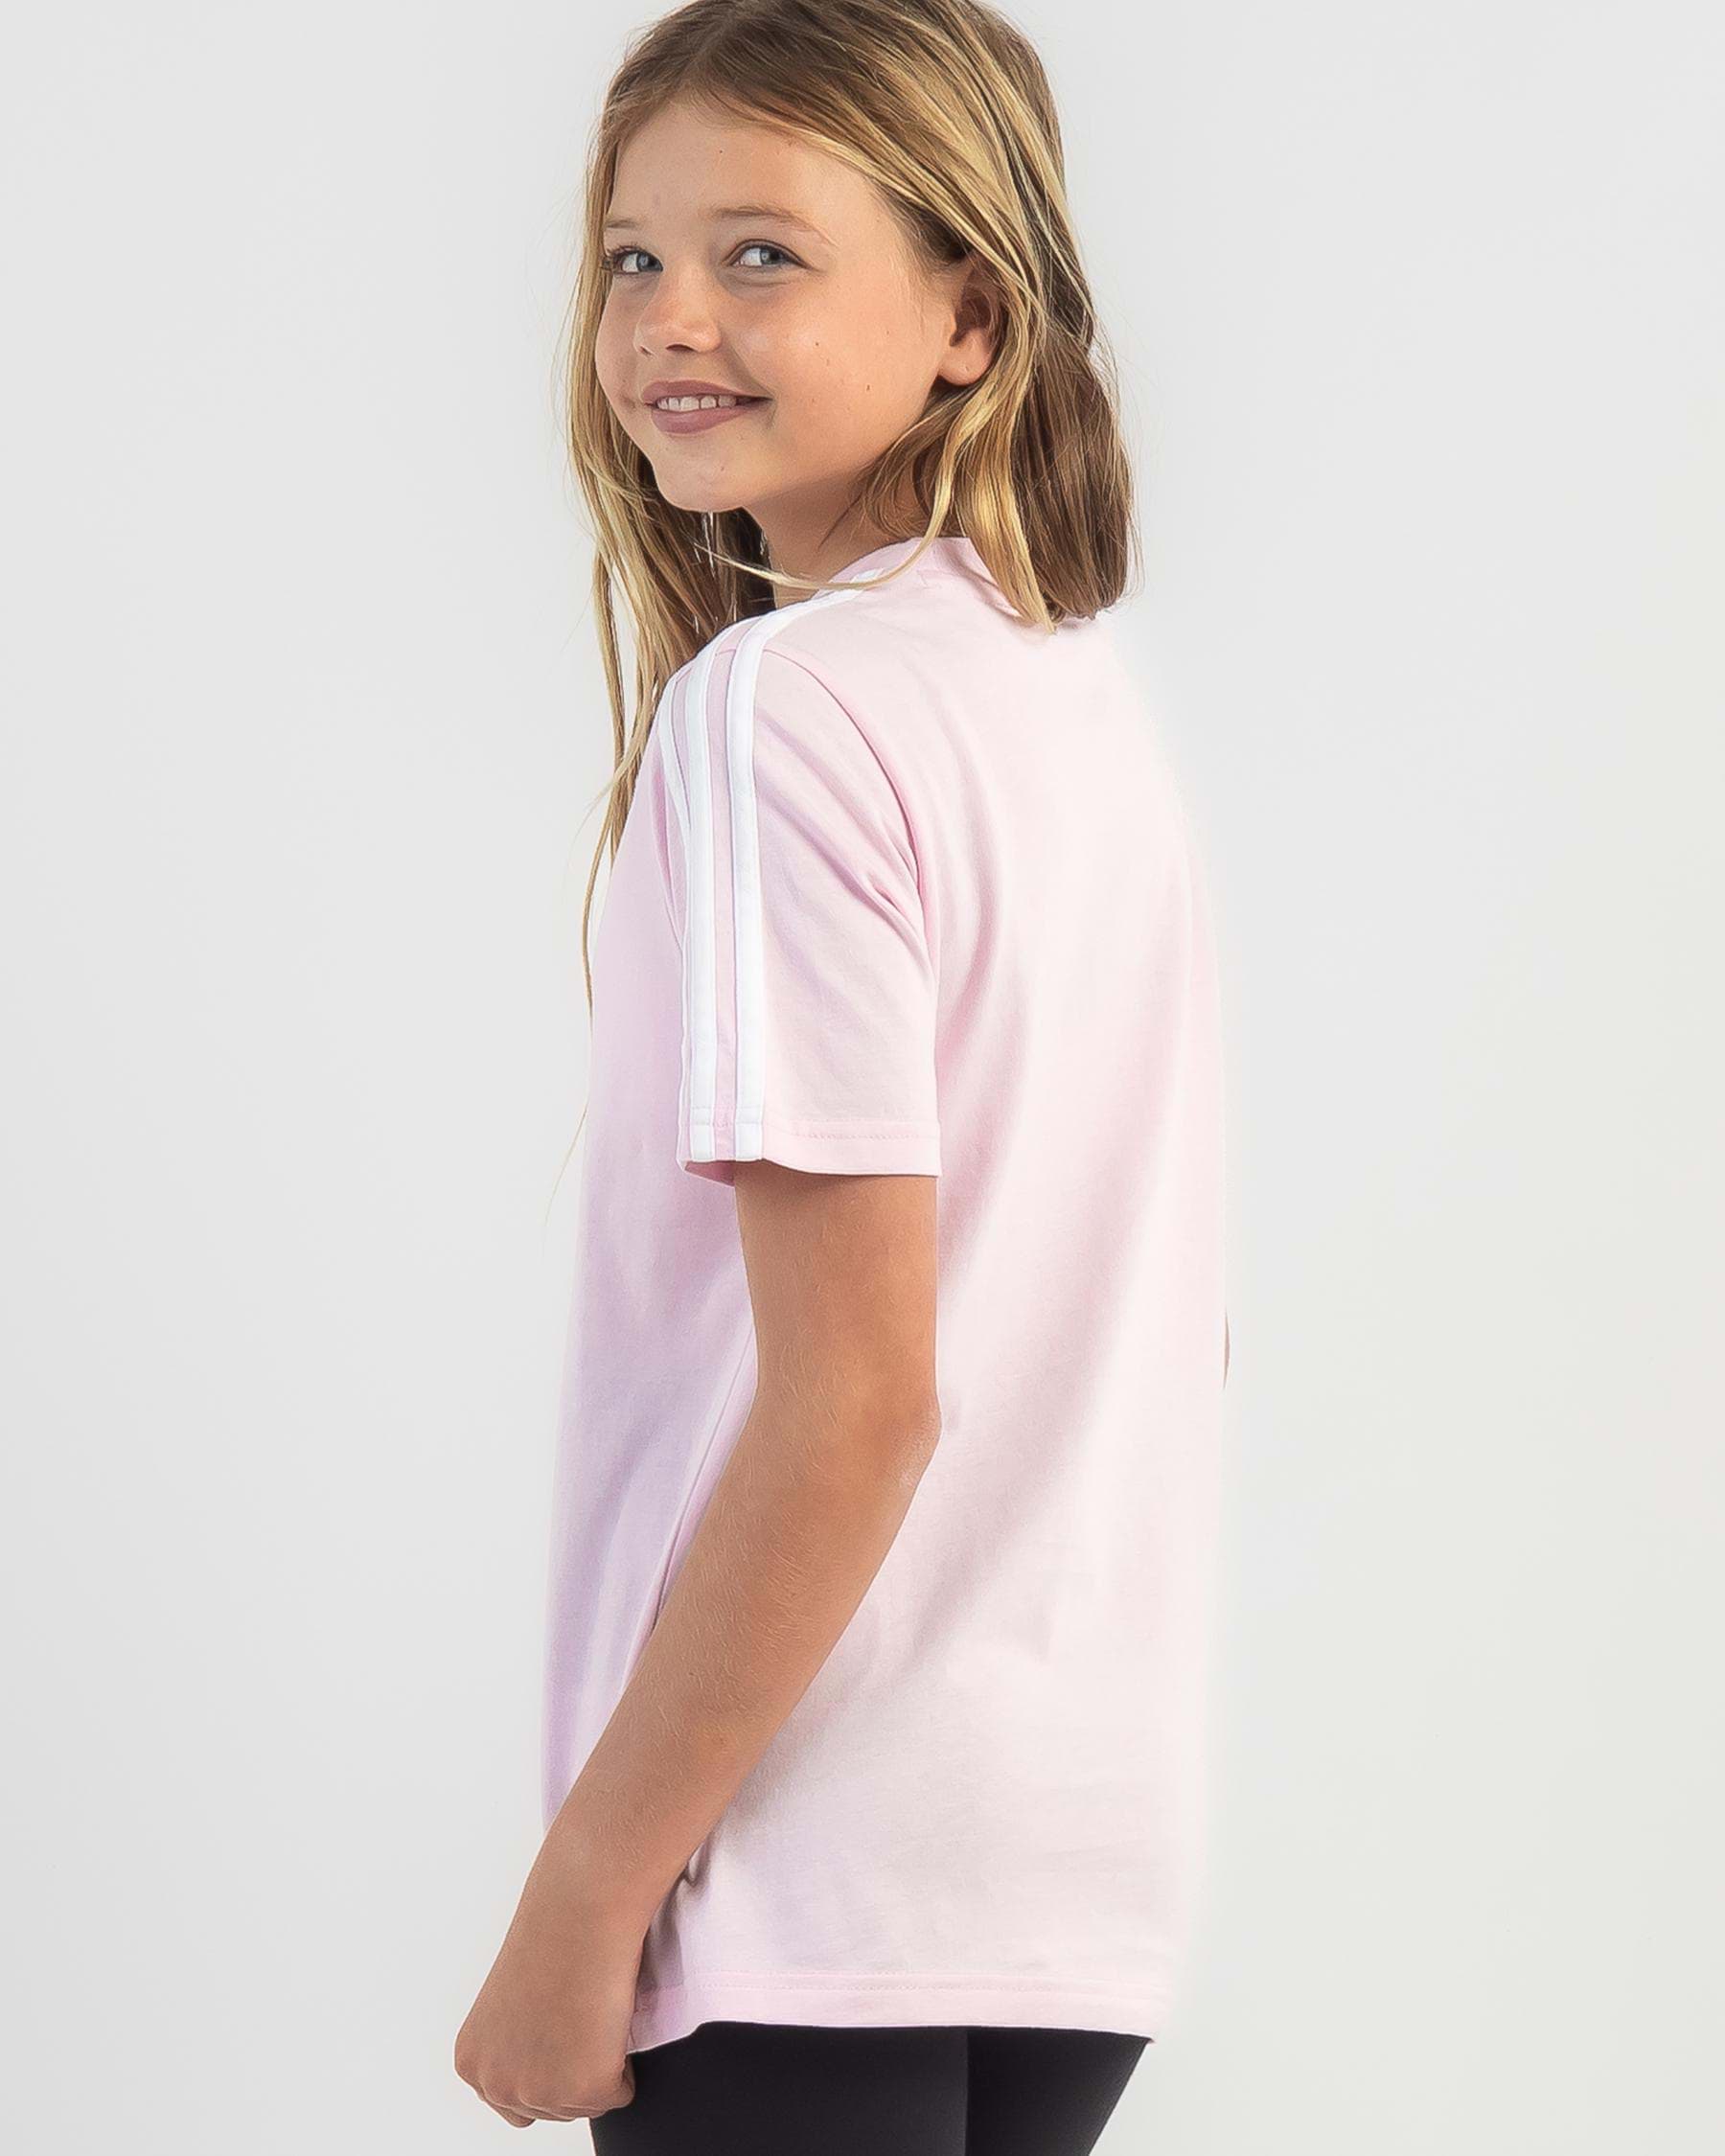 Adidas Girls' 3 Stripe T-Shirt In Clear Pink/white - Fast Shipping ...